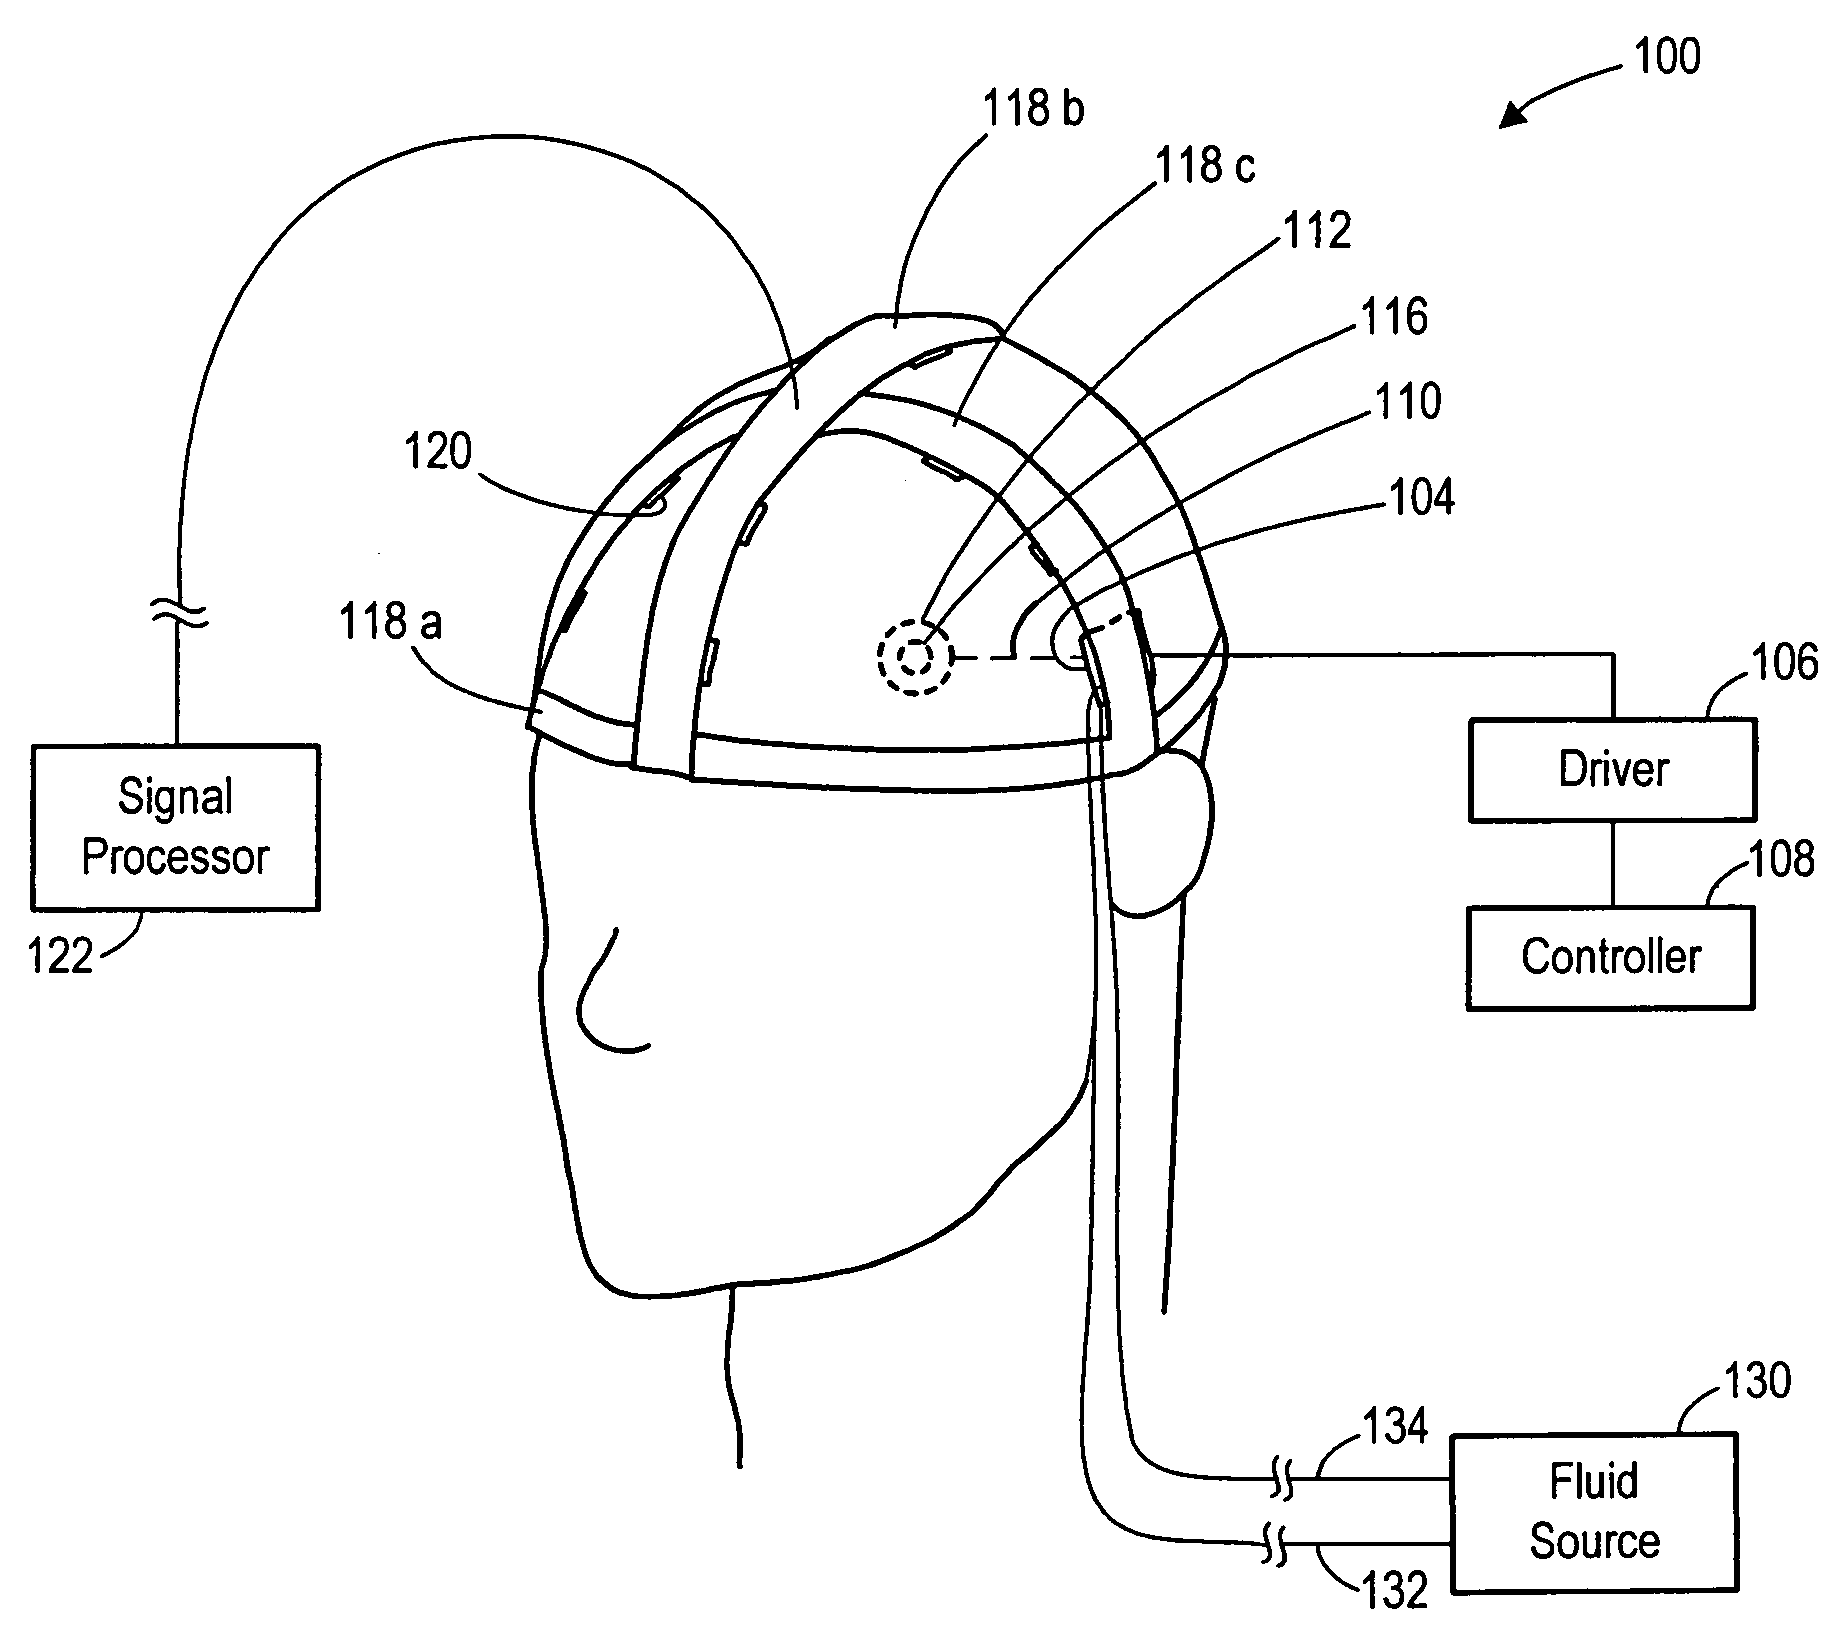 Apparatus and methods for delivering acoustic energy to body tissue